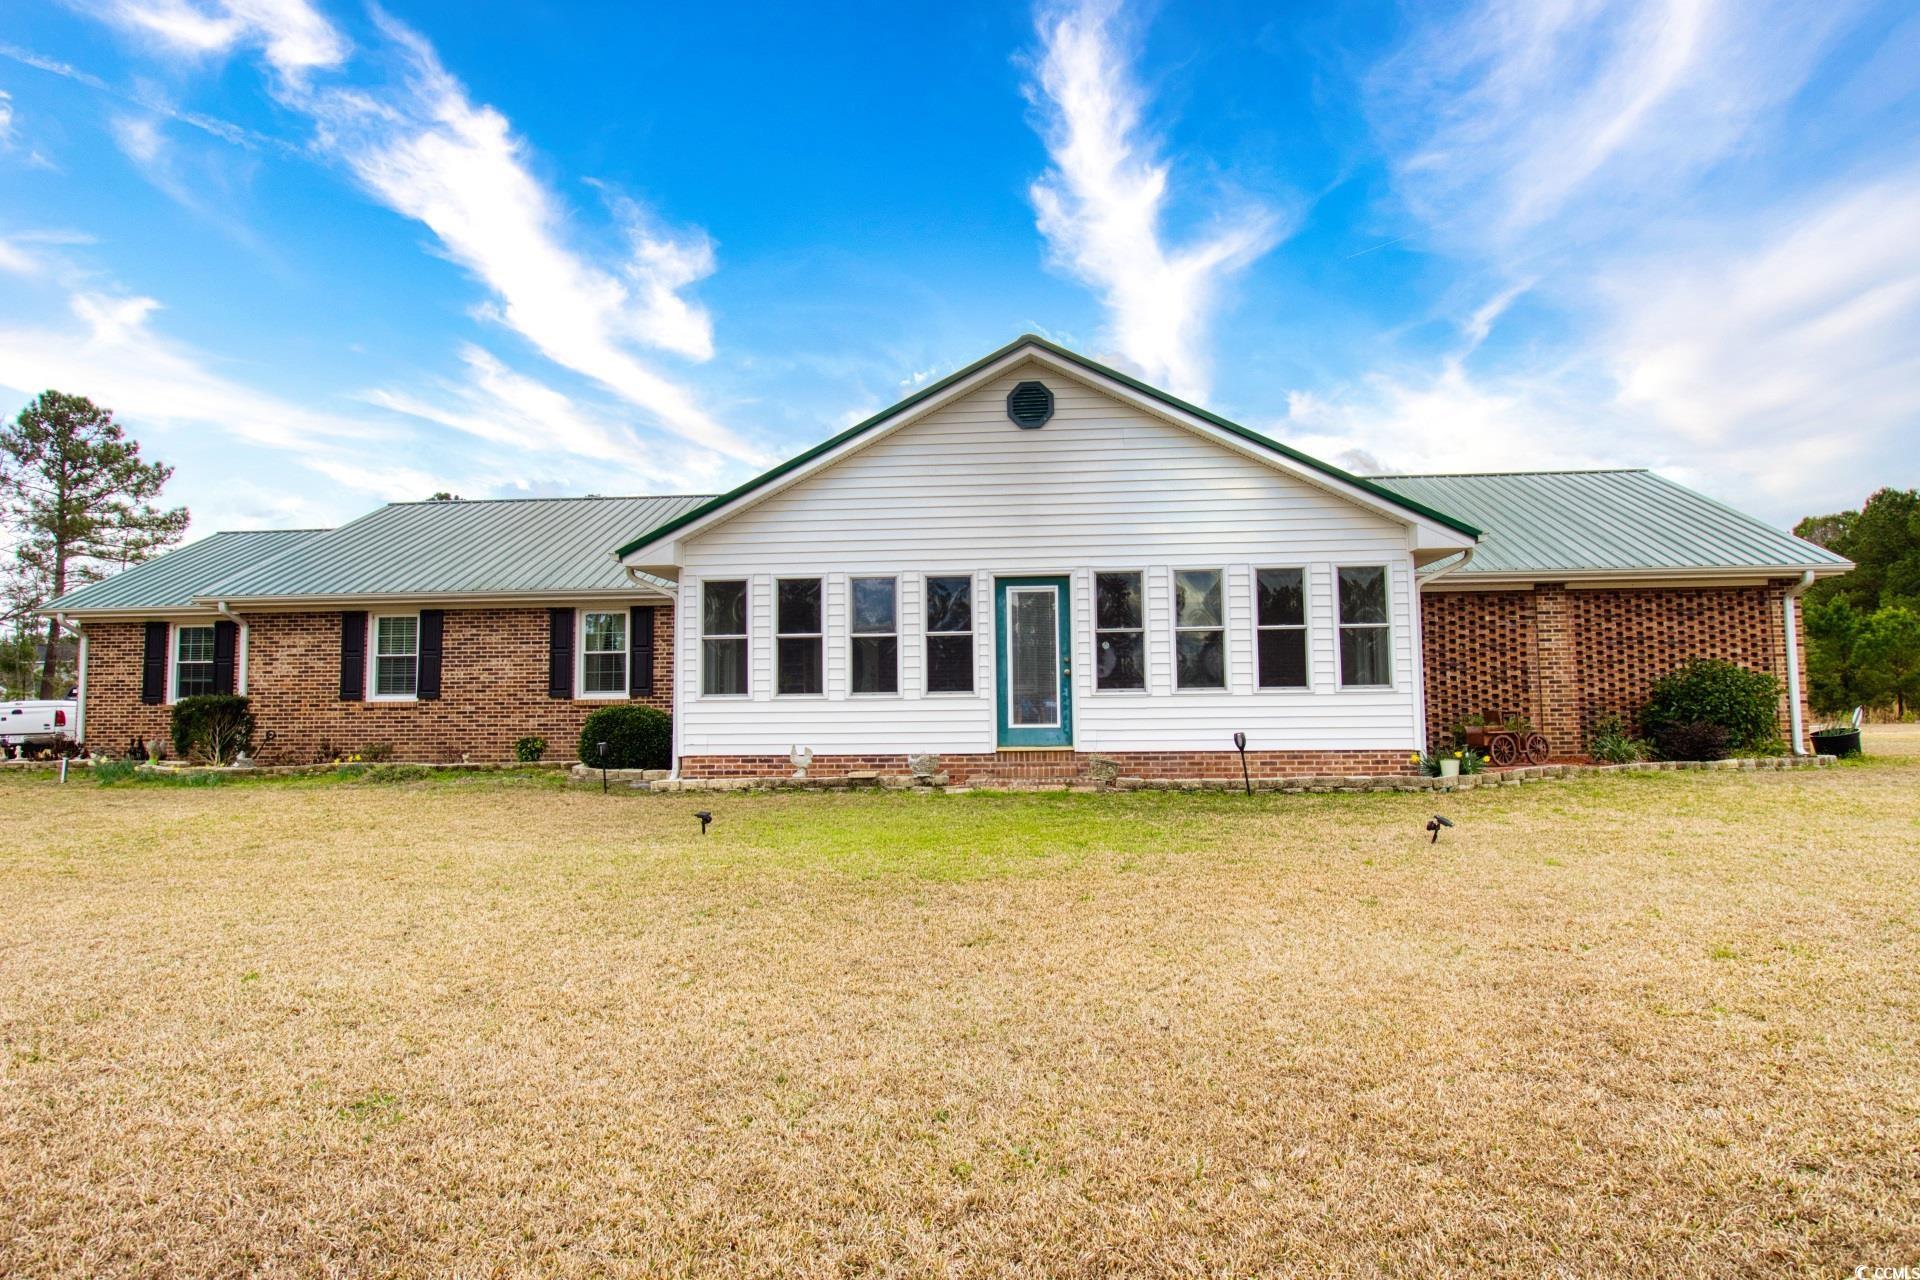 are you looking for your piece of paradise? this 2600 sq. ft., brick & vinyl sided, lakefront home sits on 1.07 acres, just outside conway city limits. # bedrooms, 2 full baths, includes many extras. large dining area & great room, kitchen with maple cabinets & stainless steel appliances, master bath with large whirlpool tub & 2 huge walk-in closets. there is also a large room with a separate entrance from the outside that has the ability to be used for many options. the home has a metal roof that is approximately 4-5 years old, whole house 16 kw generator, 2 stage hvac, halo water filtration unit, buried propane tank, new microwave & new dishwasher, stove, high efficiency washer & dryer & carport! enclosed front porch & heated & cooled carolina room in rear. tons of storage space! location of this home is excellent, being close to everything that conway & myrtle beach has to offer! make it a must see!!